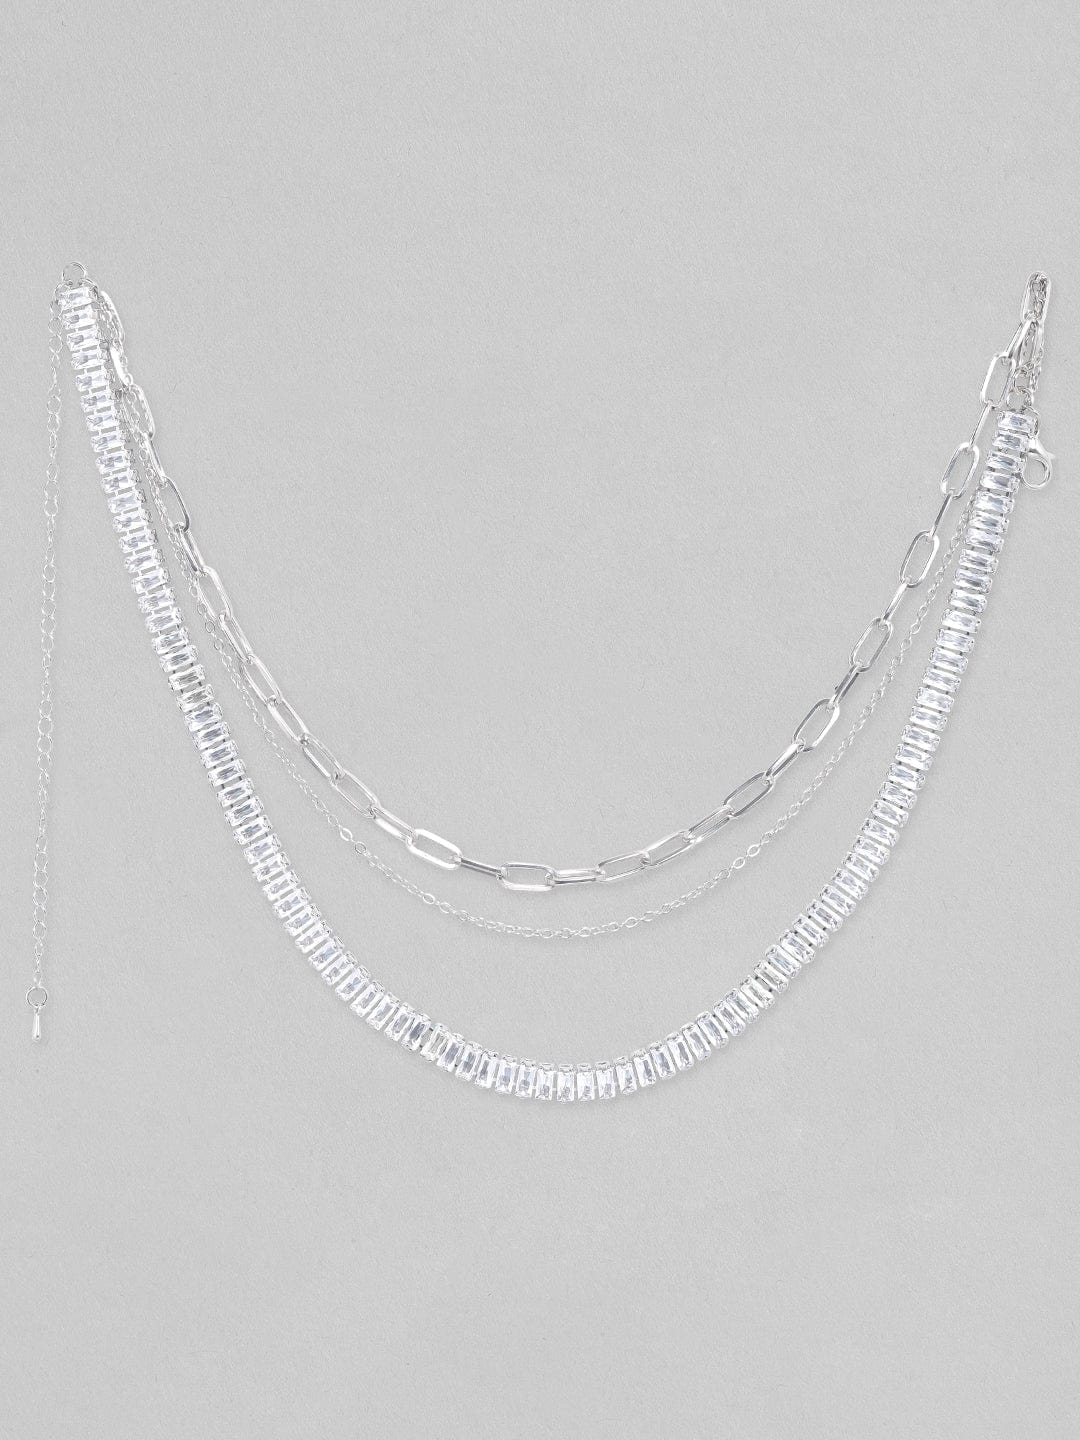 Rubans Voguish Silver Toned With Baguette And Round Zircon Stones Studded Layered Necklace. Chain &amp; Necklaces